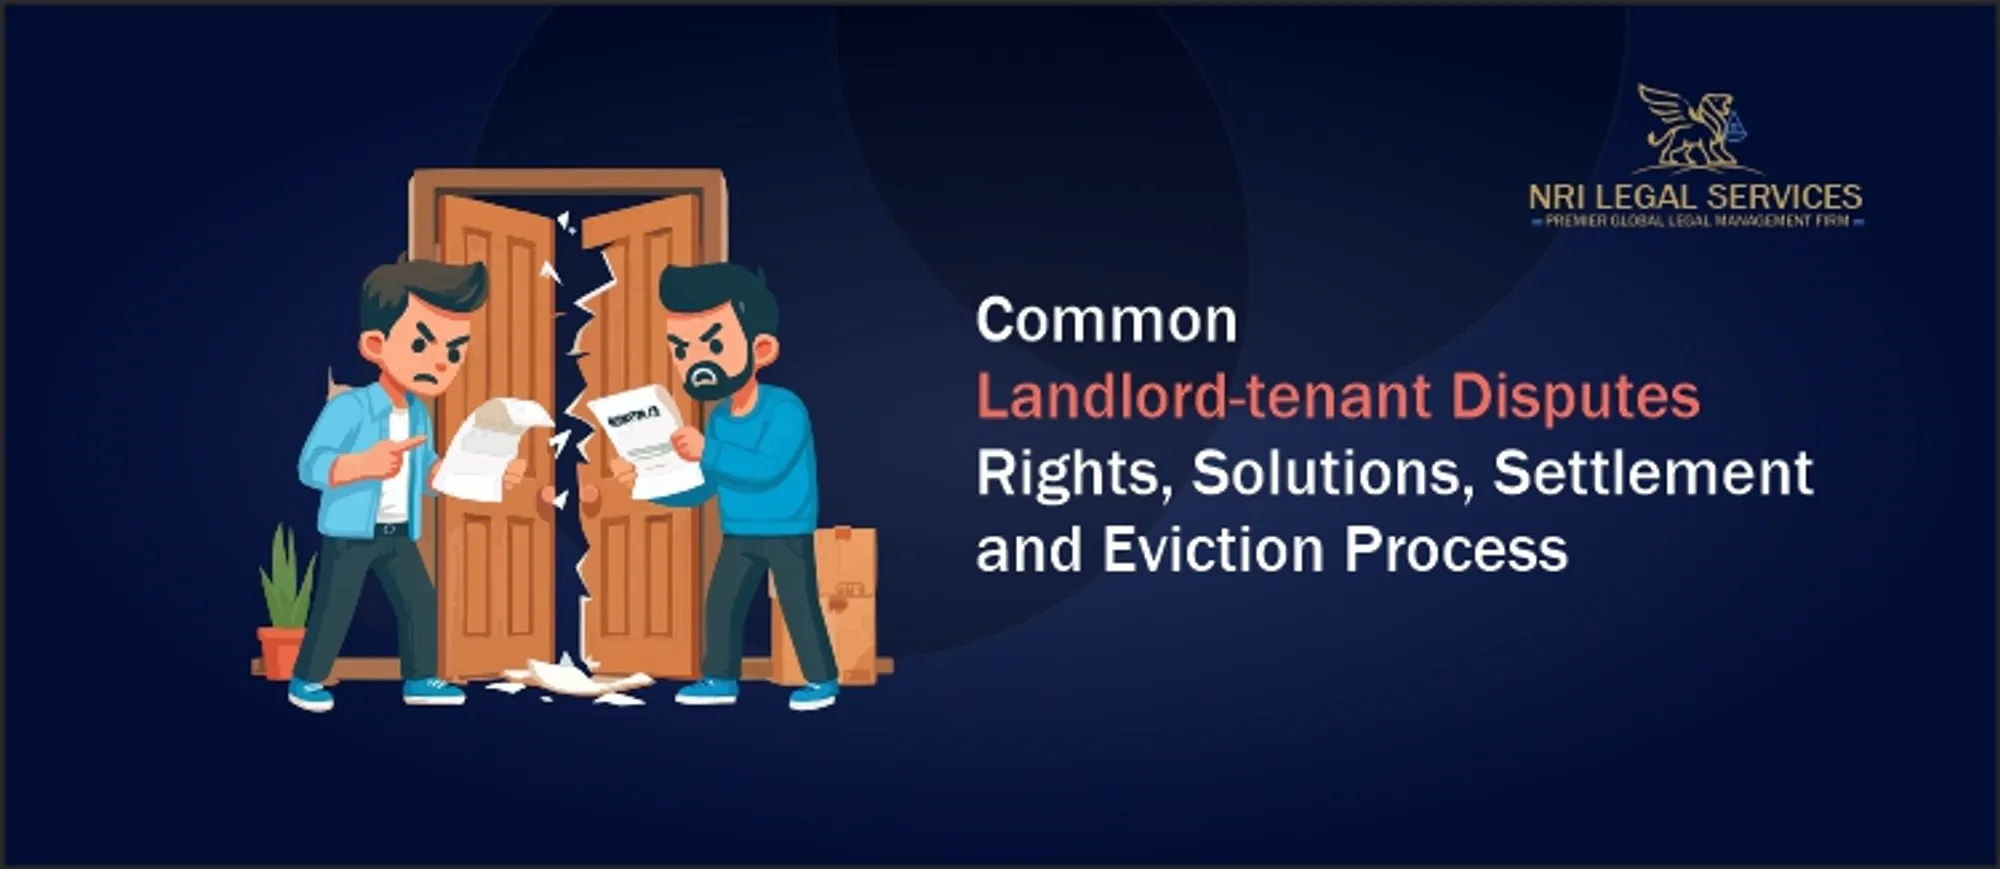 Common landlord-tenant disputes rights, solutions, settlement and eviction process